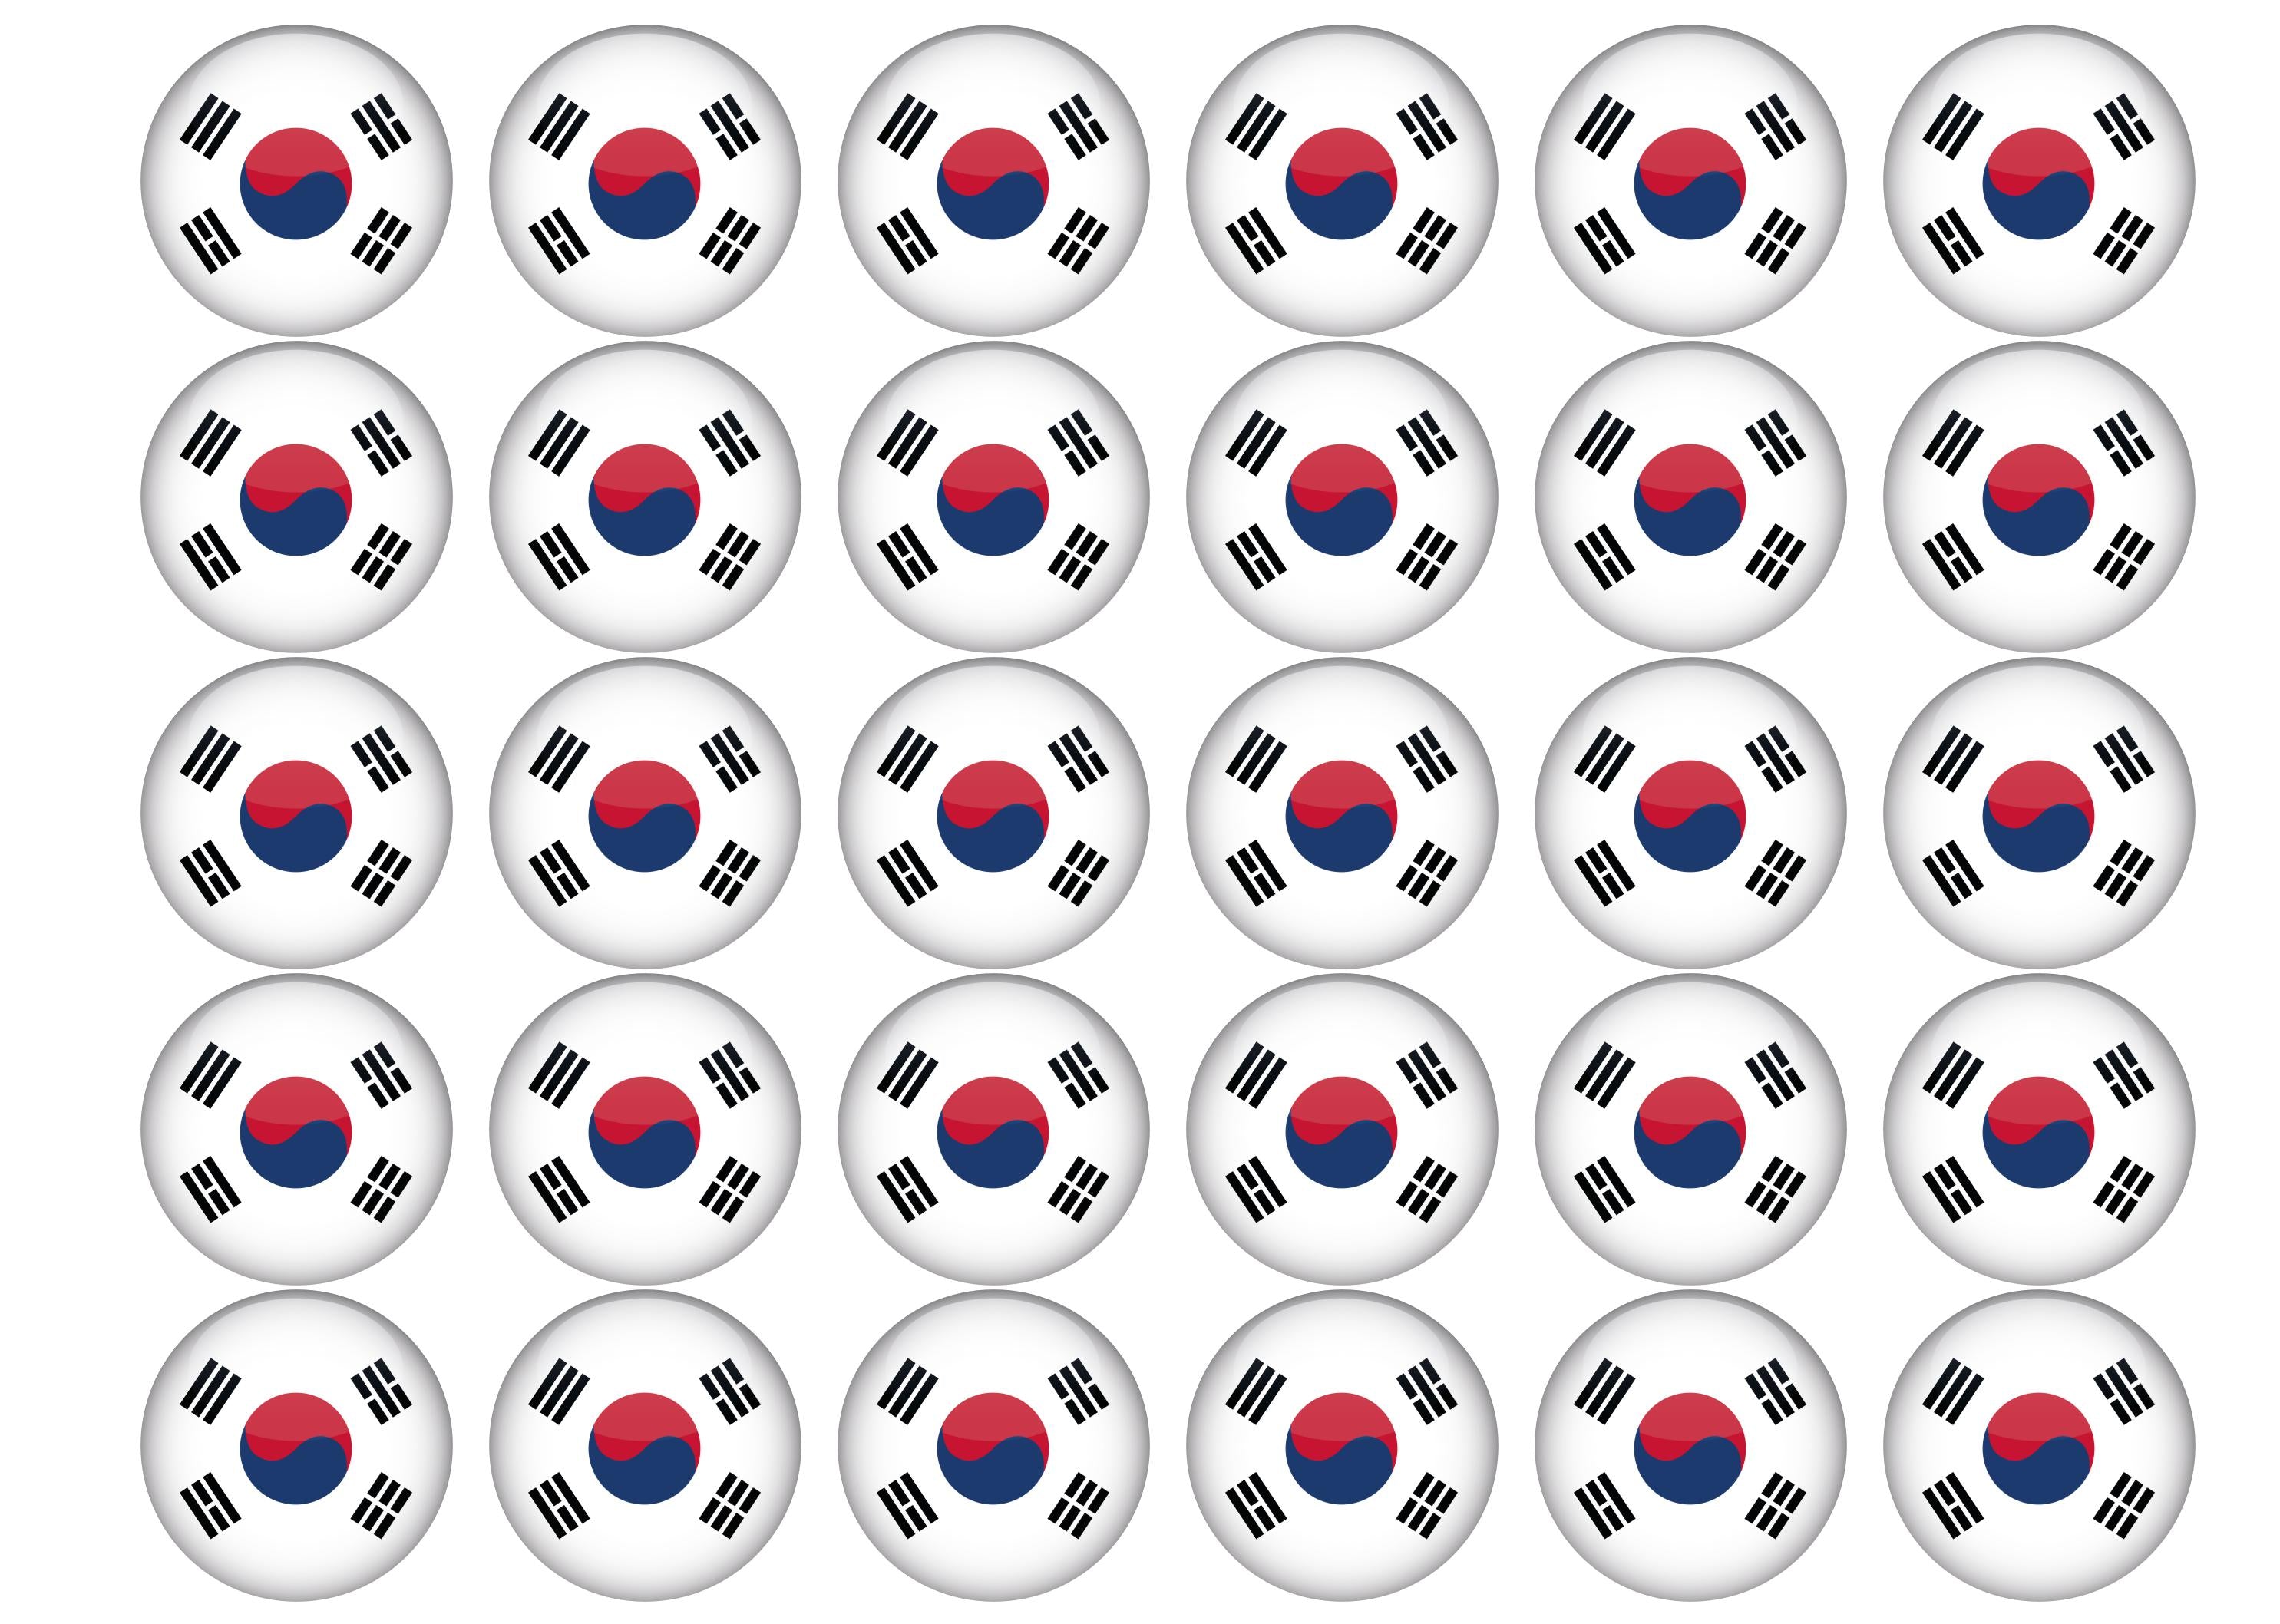 30 edible toppers with the South Korea flag